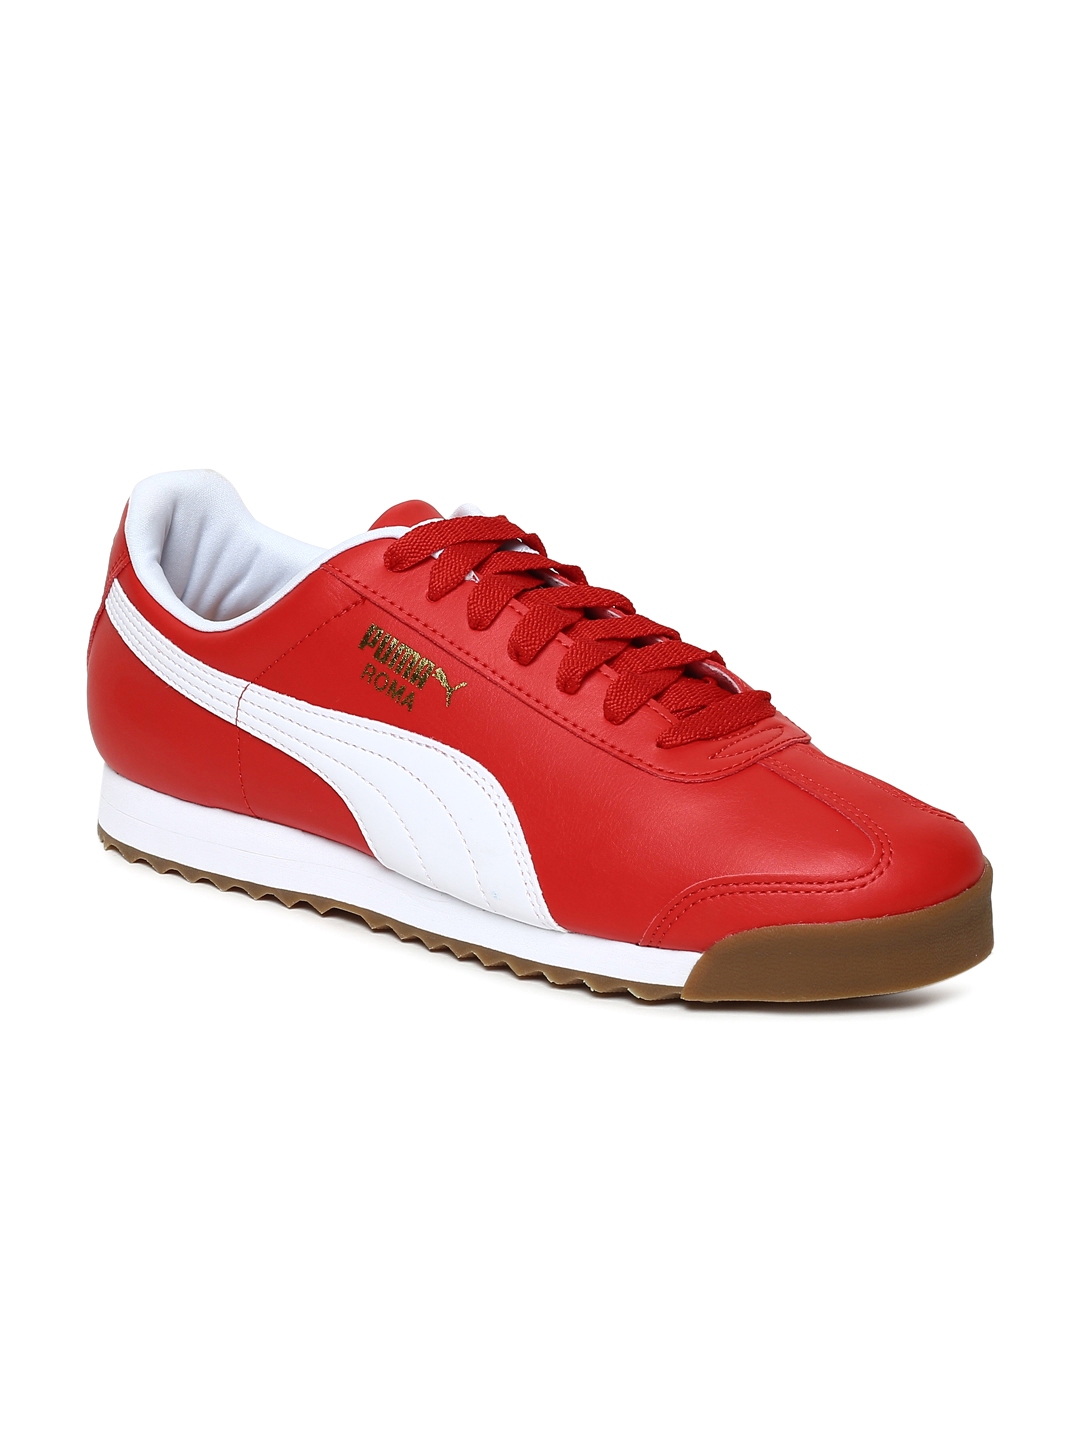 red leather puma sneakers